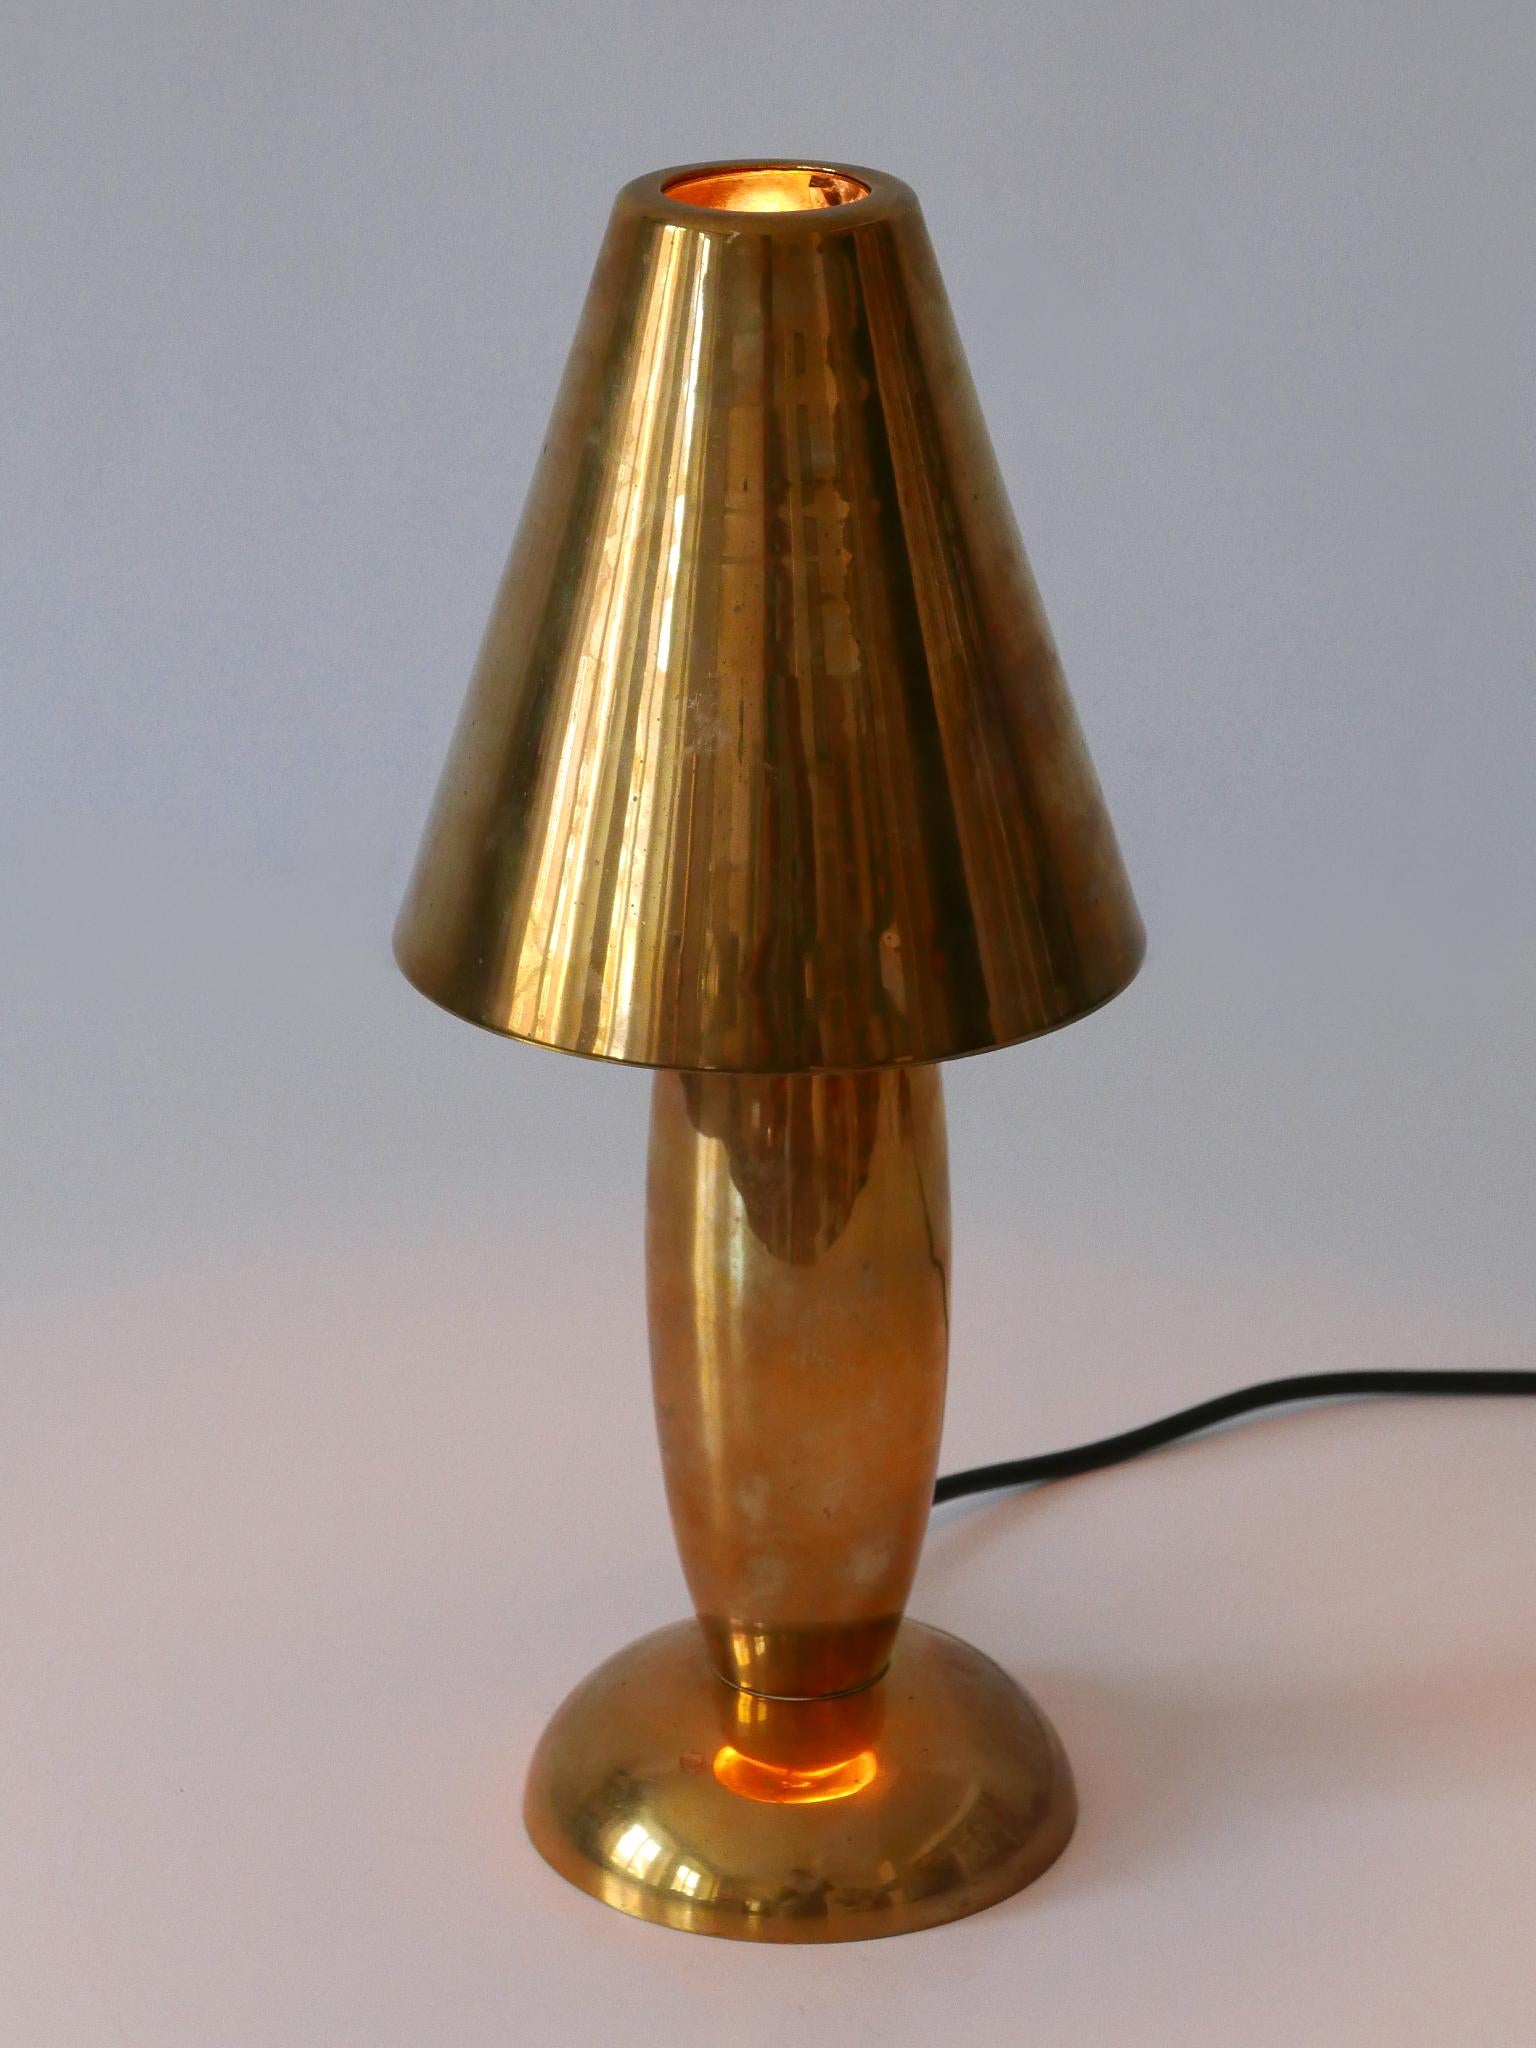 Rare & Lovely Mid-Century Modern Brass Side Table Lamp by Lambert Germany 1970s For Sale 4